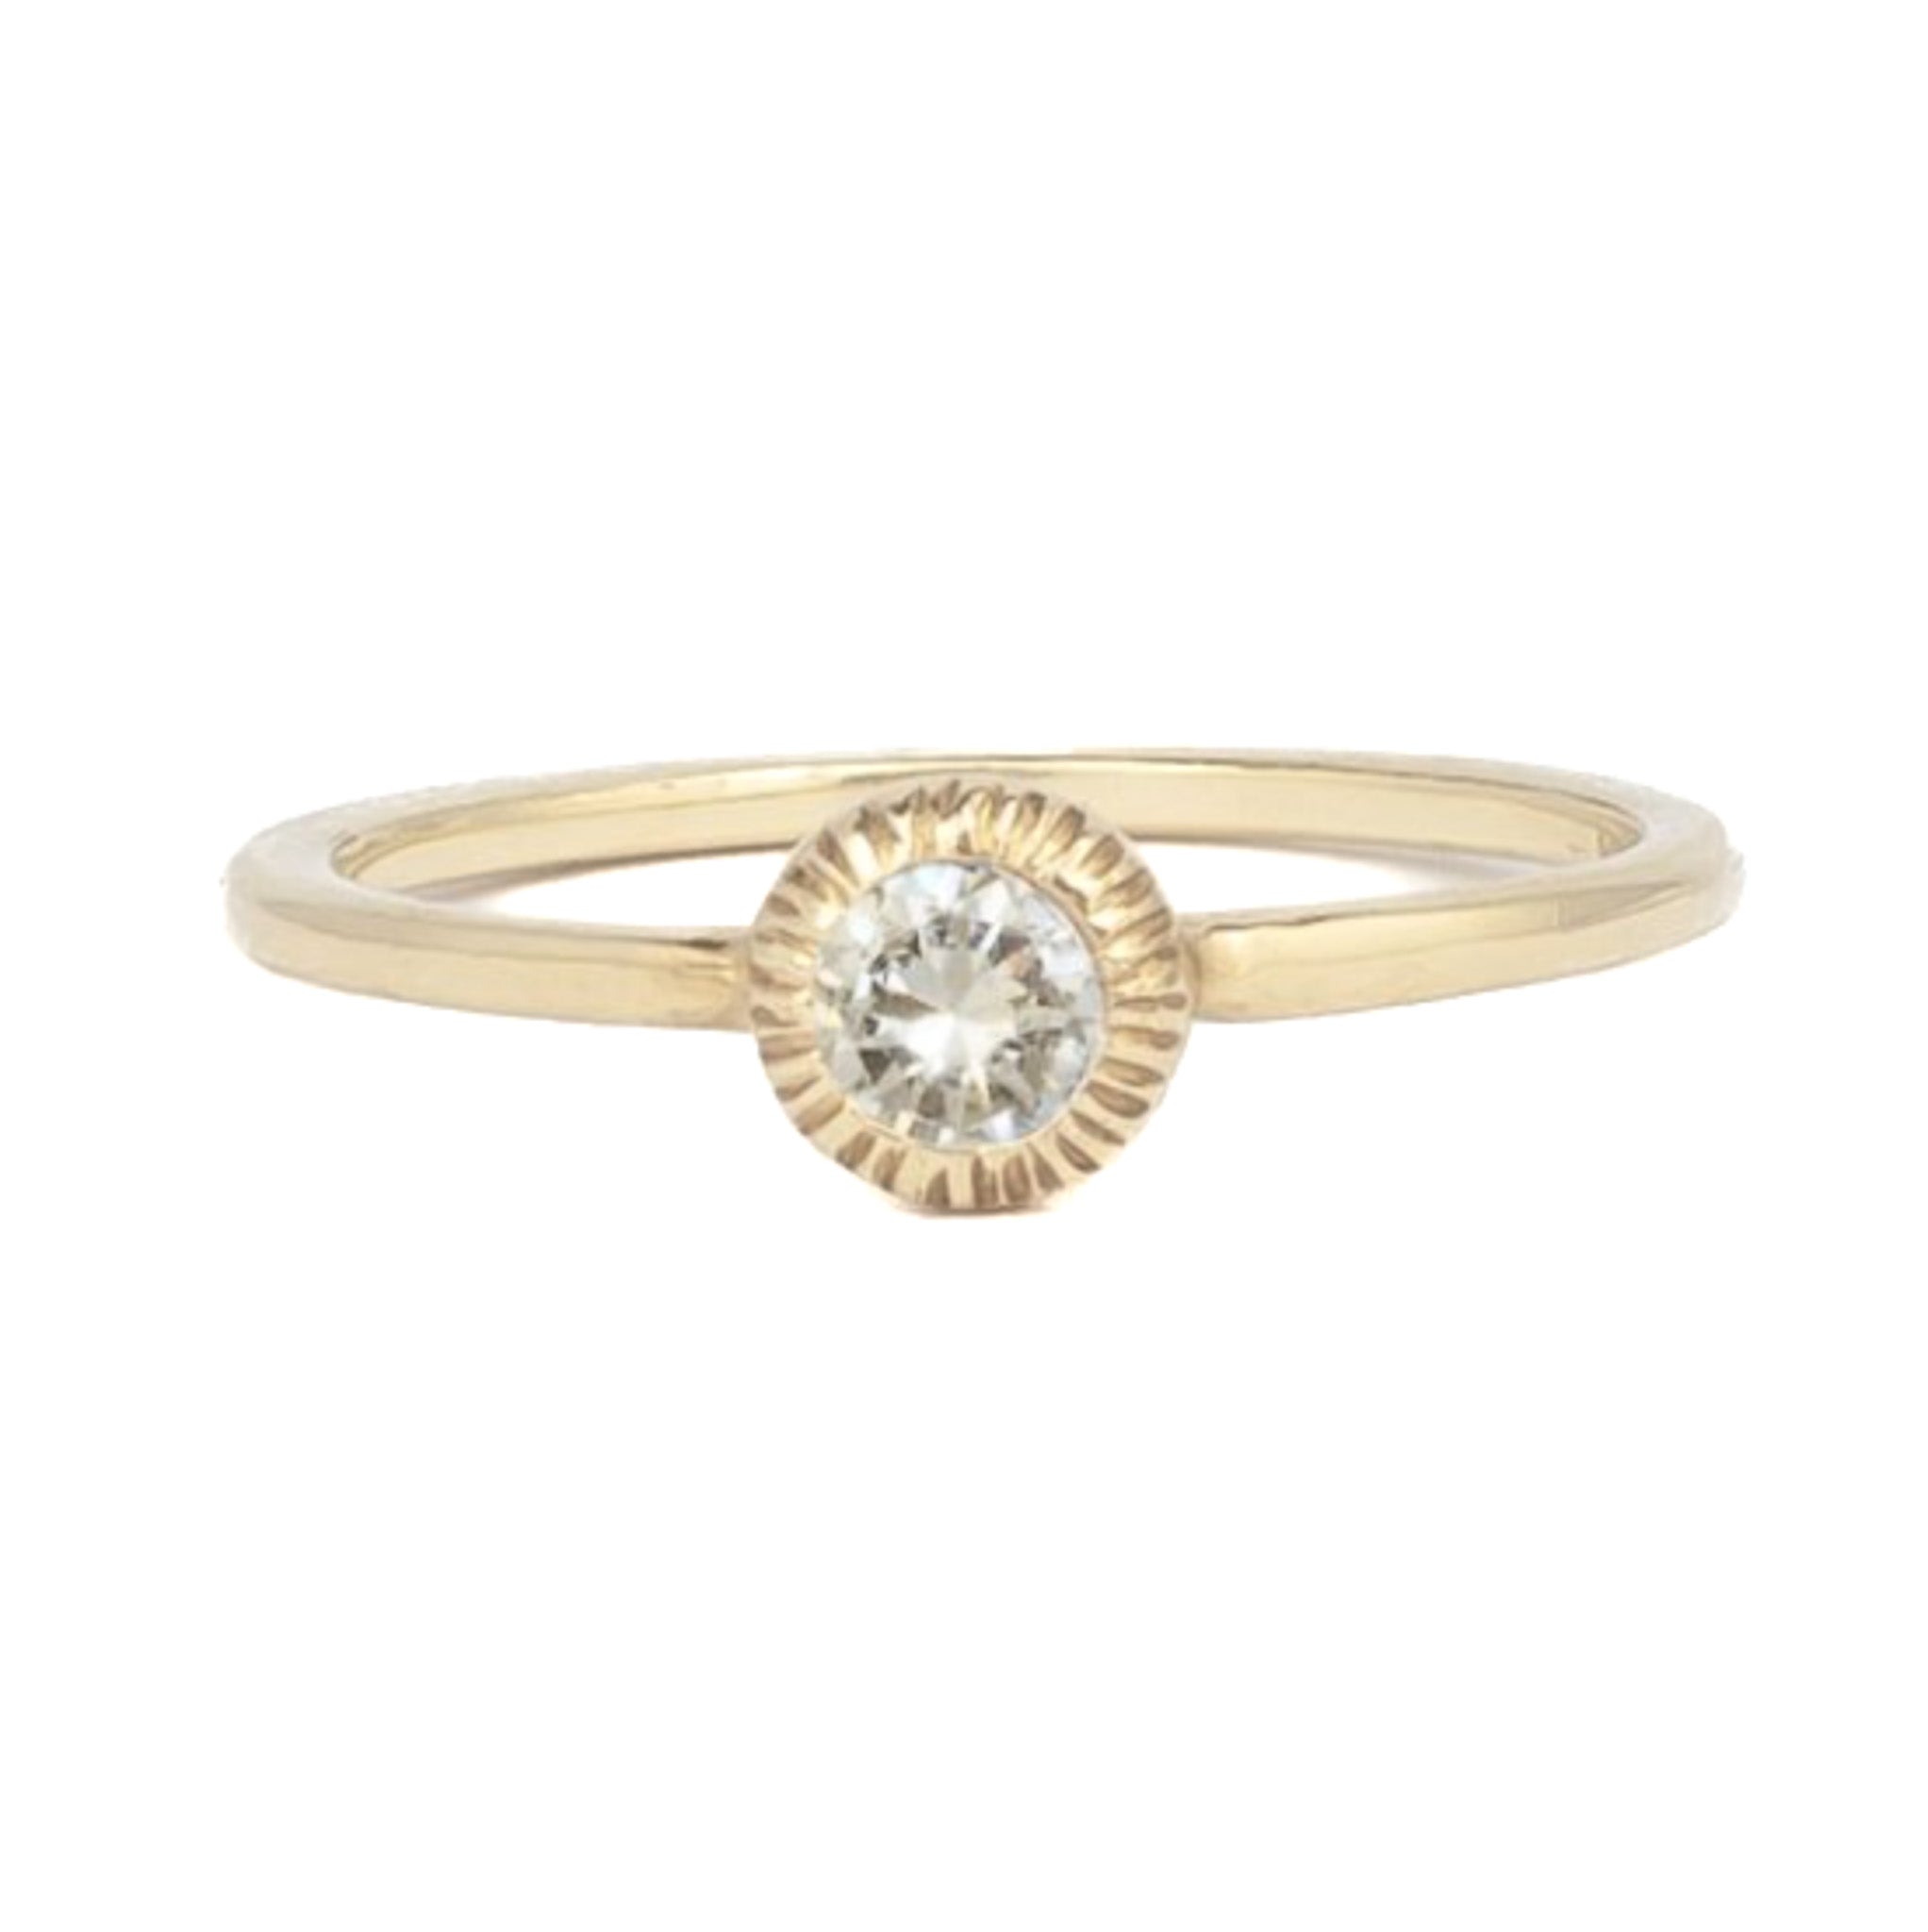 diamond solitaire ring 18ct gold 